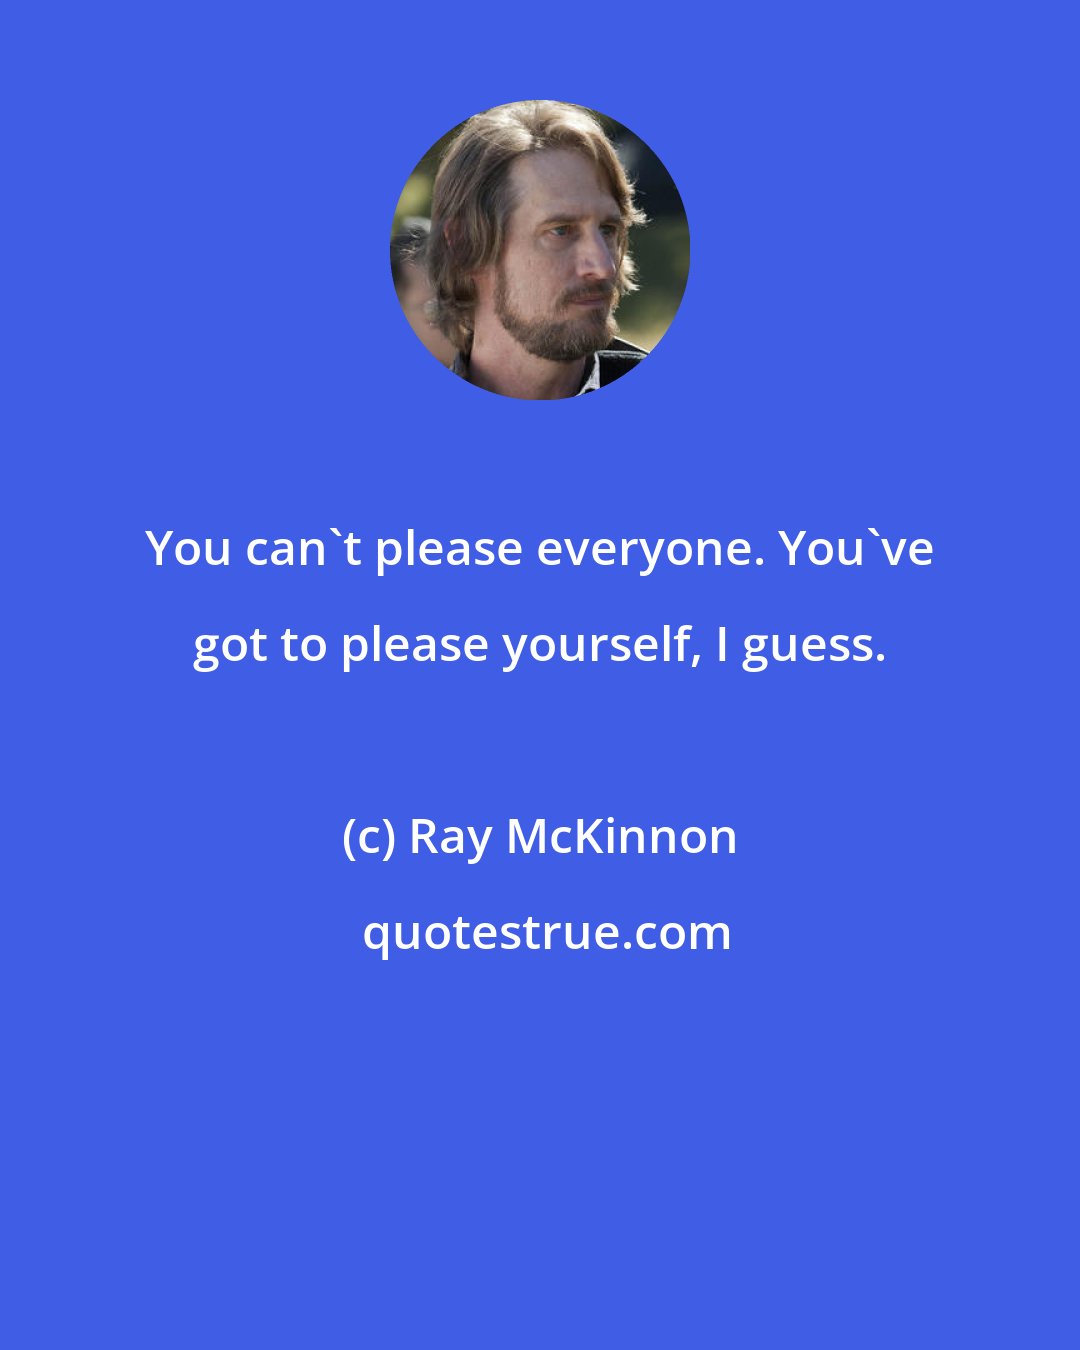 Ray McKinnon: You can't please everyone. You've got to please yourself, I guess.